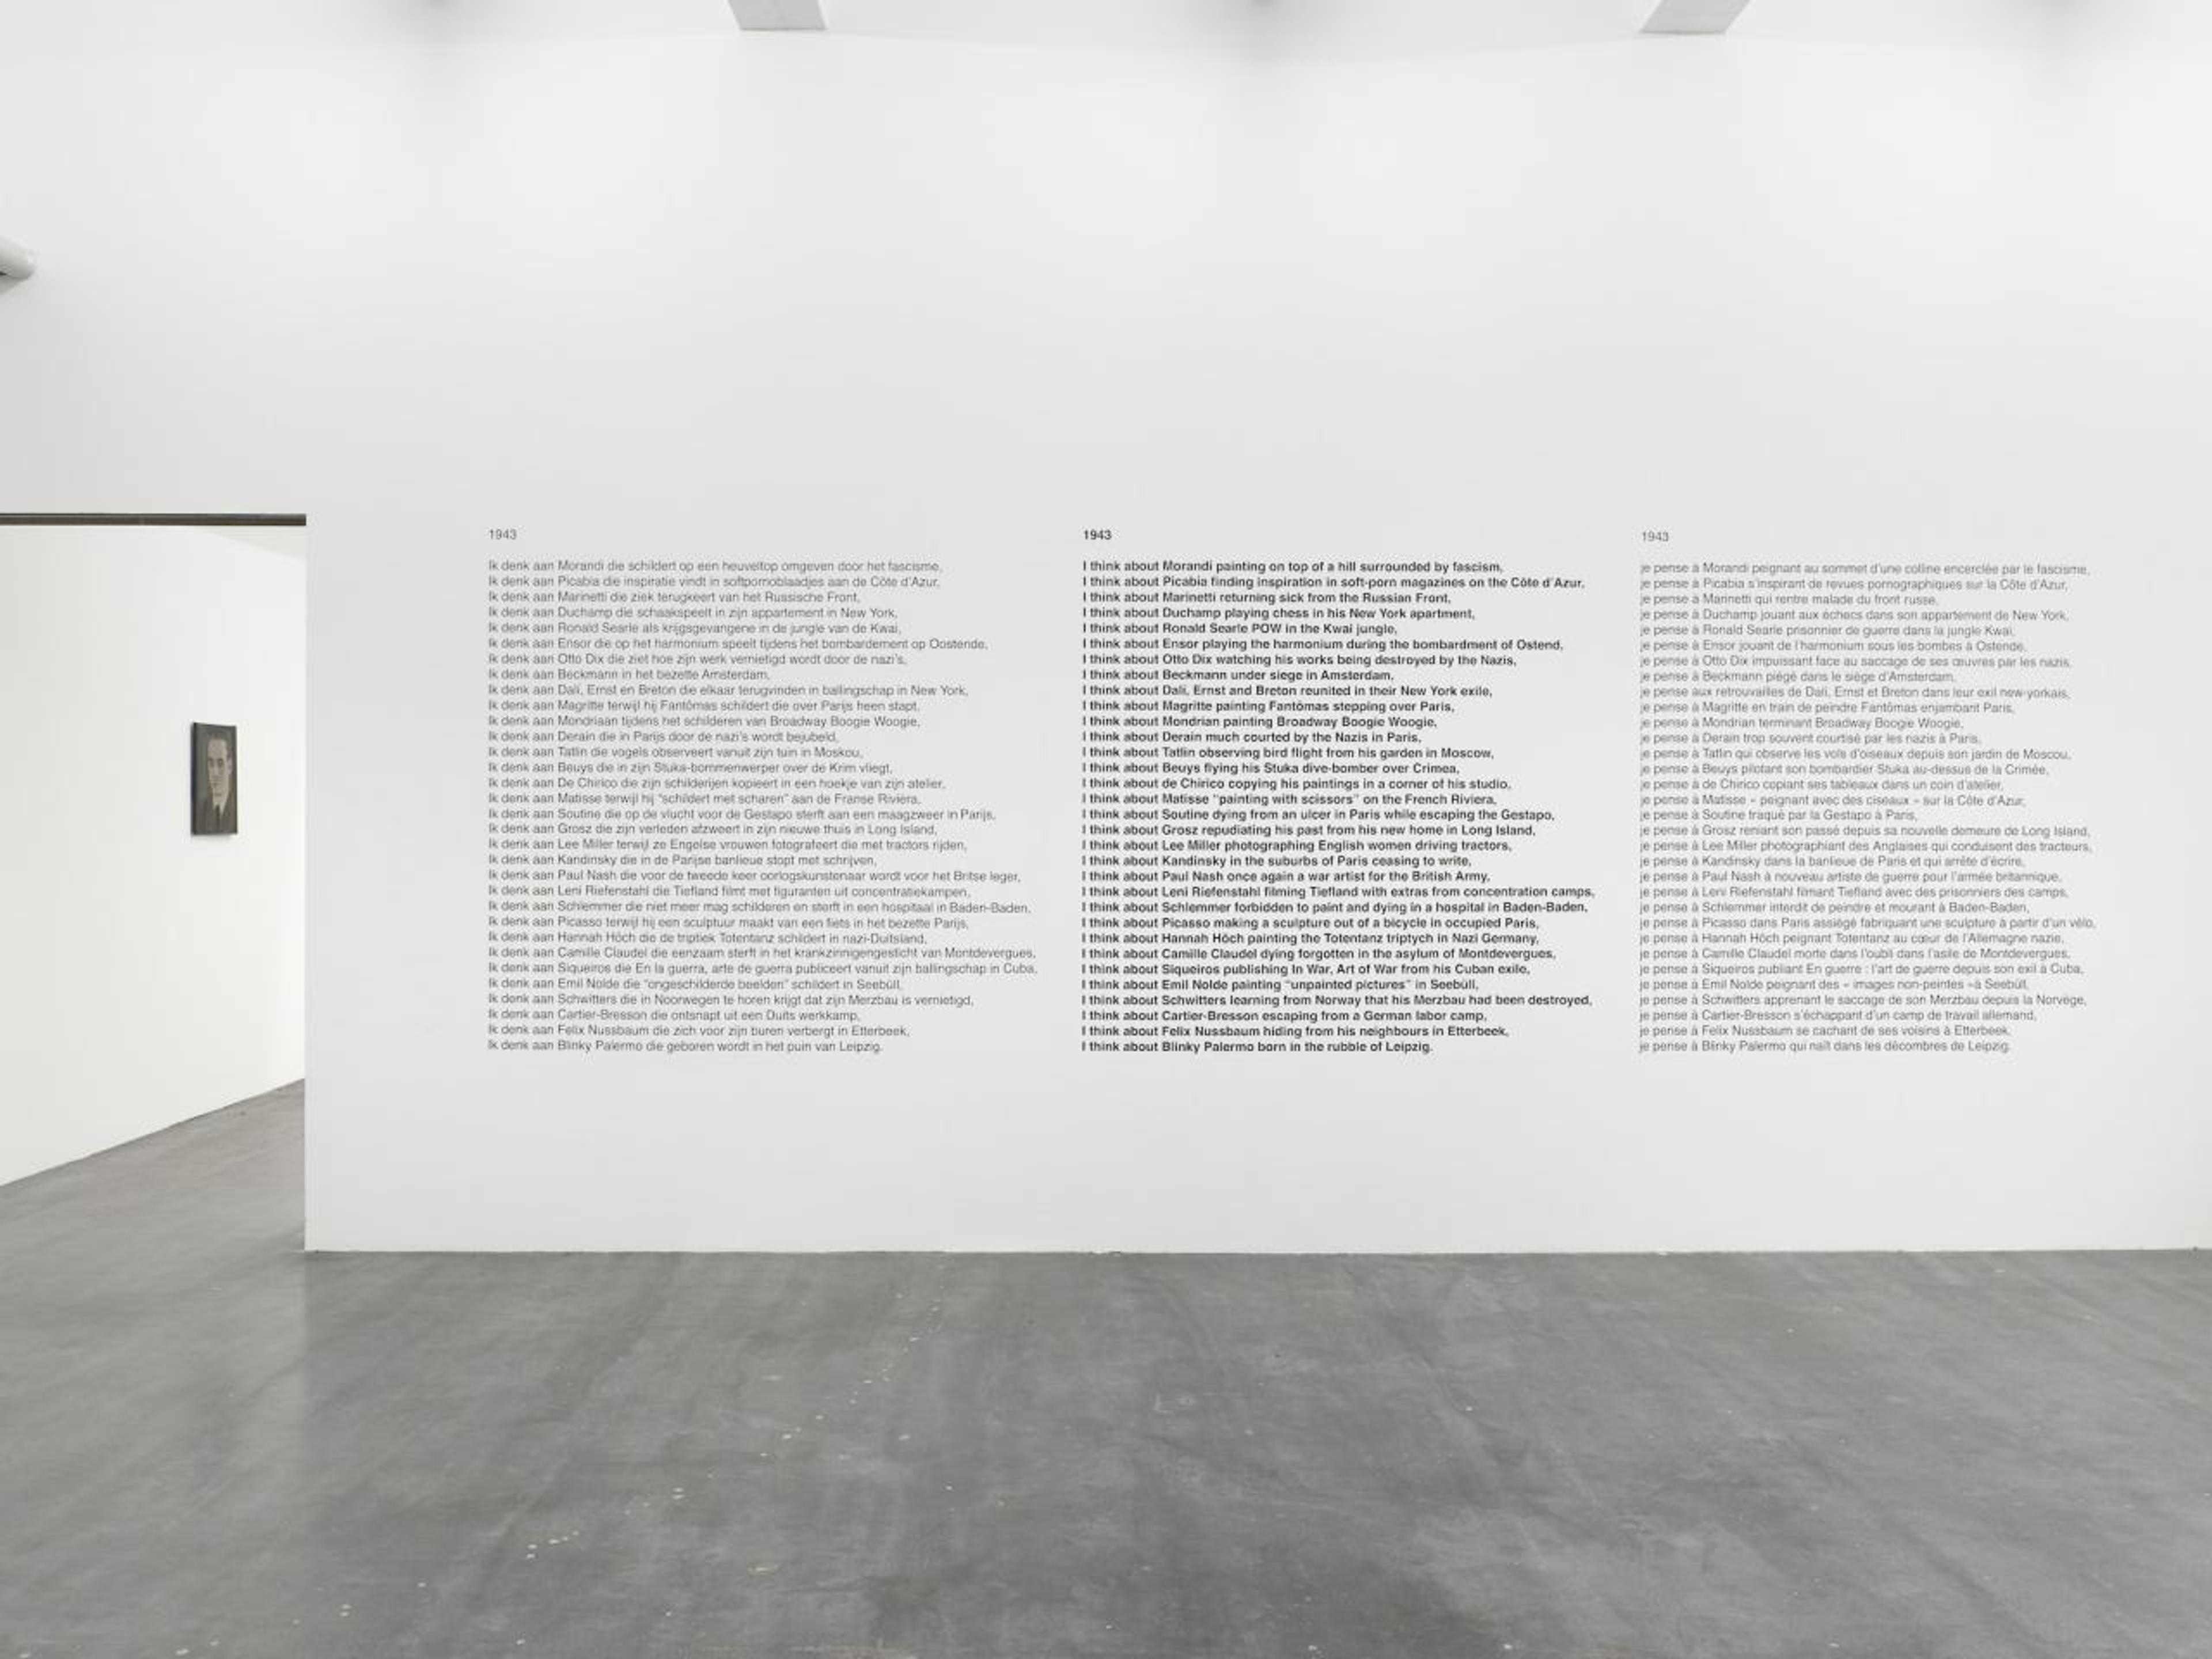 Francis Alÿs, installation view